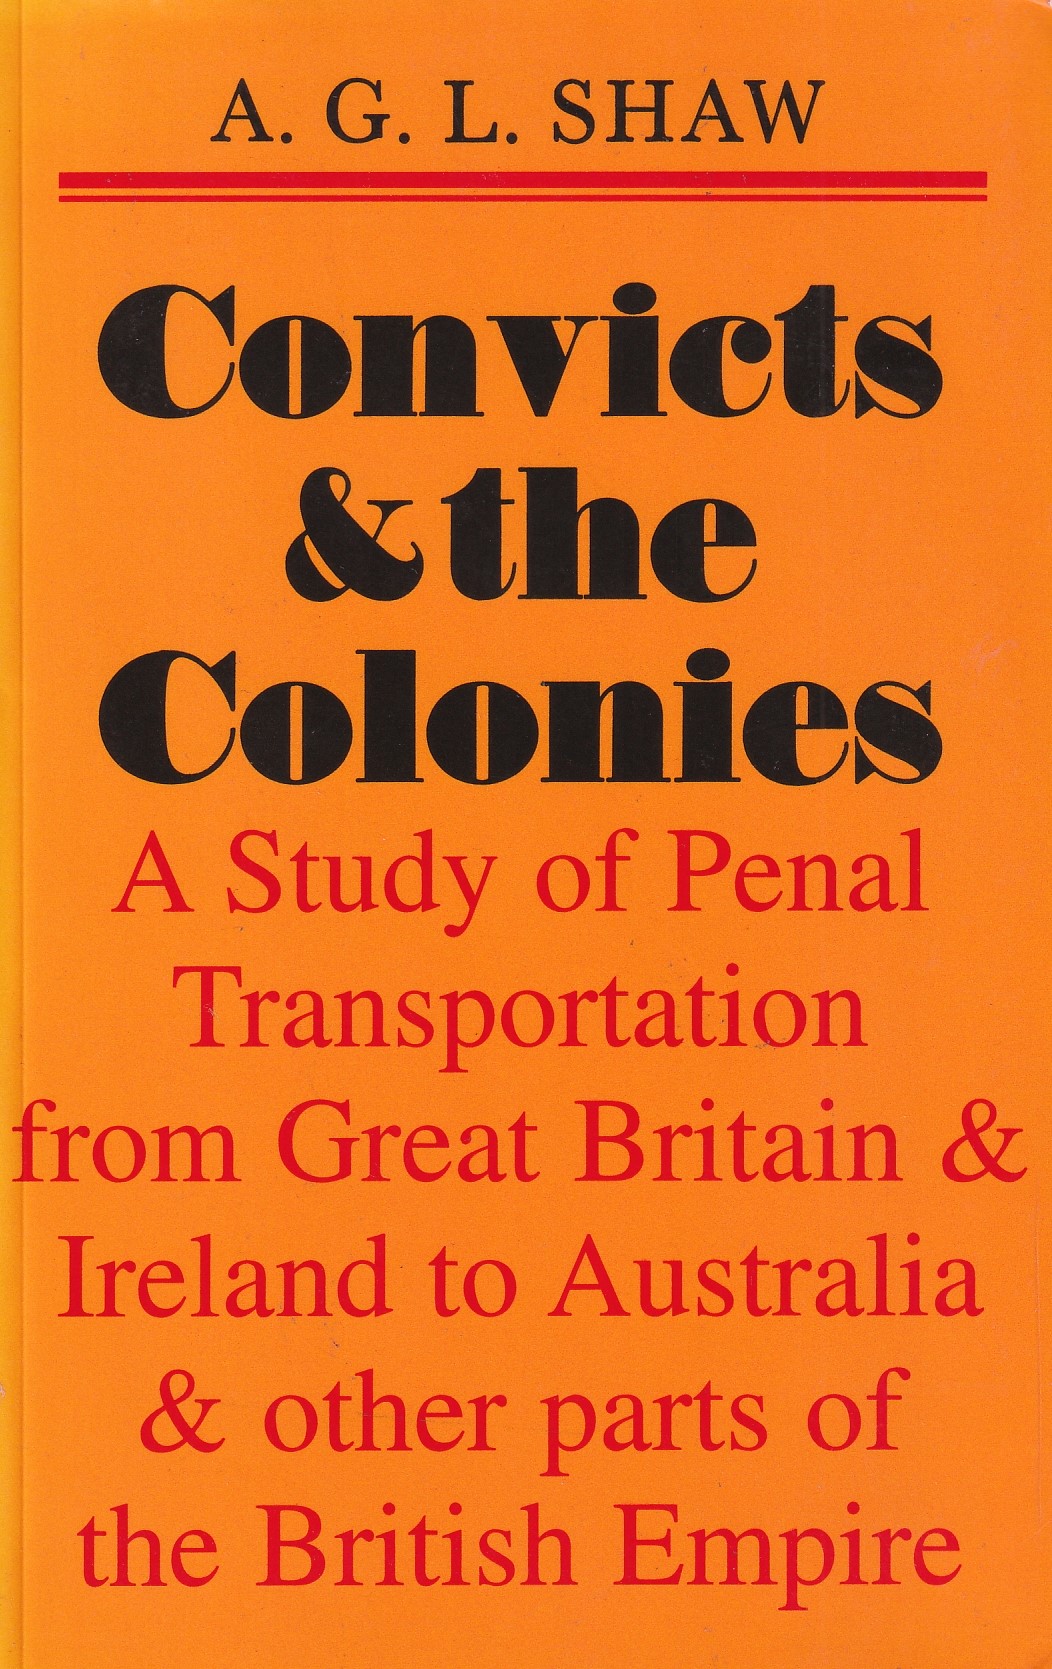 Convicts & The Colonies: A Study Of Penal Transportation From Great Britain And Ireland To Australia And Other Parts Of The British Empire | A. G. L. Shaw | Charlie Byrne's